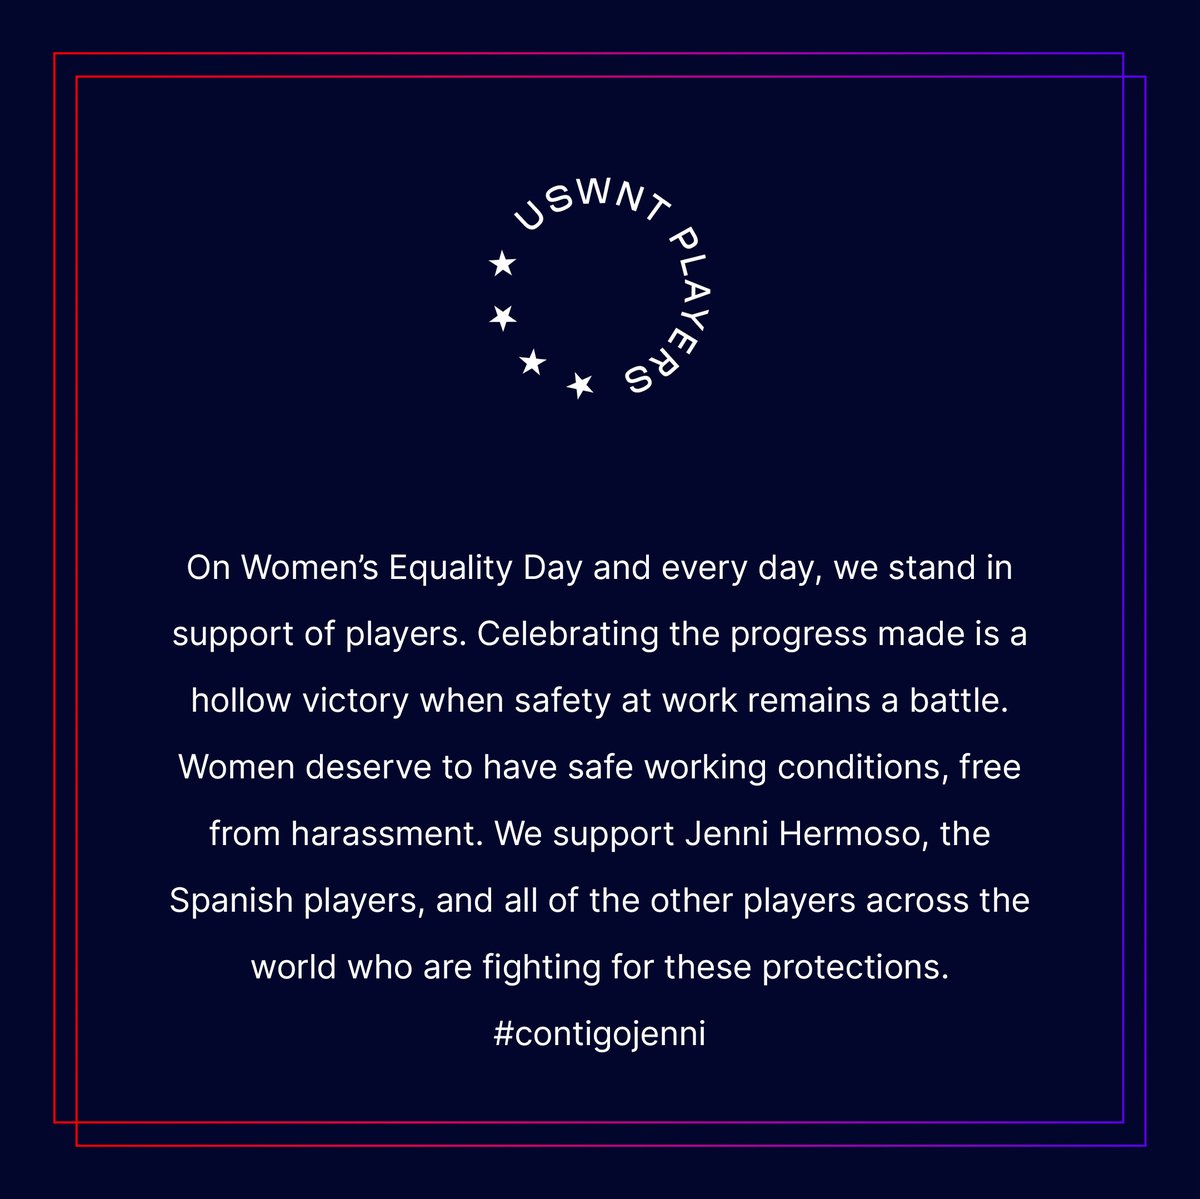 We support @jennihermoso, the Spanish players, and all of the other players across the world who are fighting for safe working environments. #contigojenni